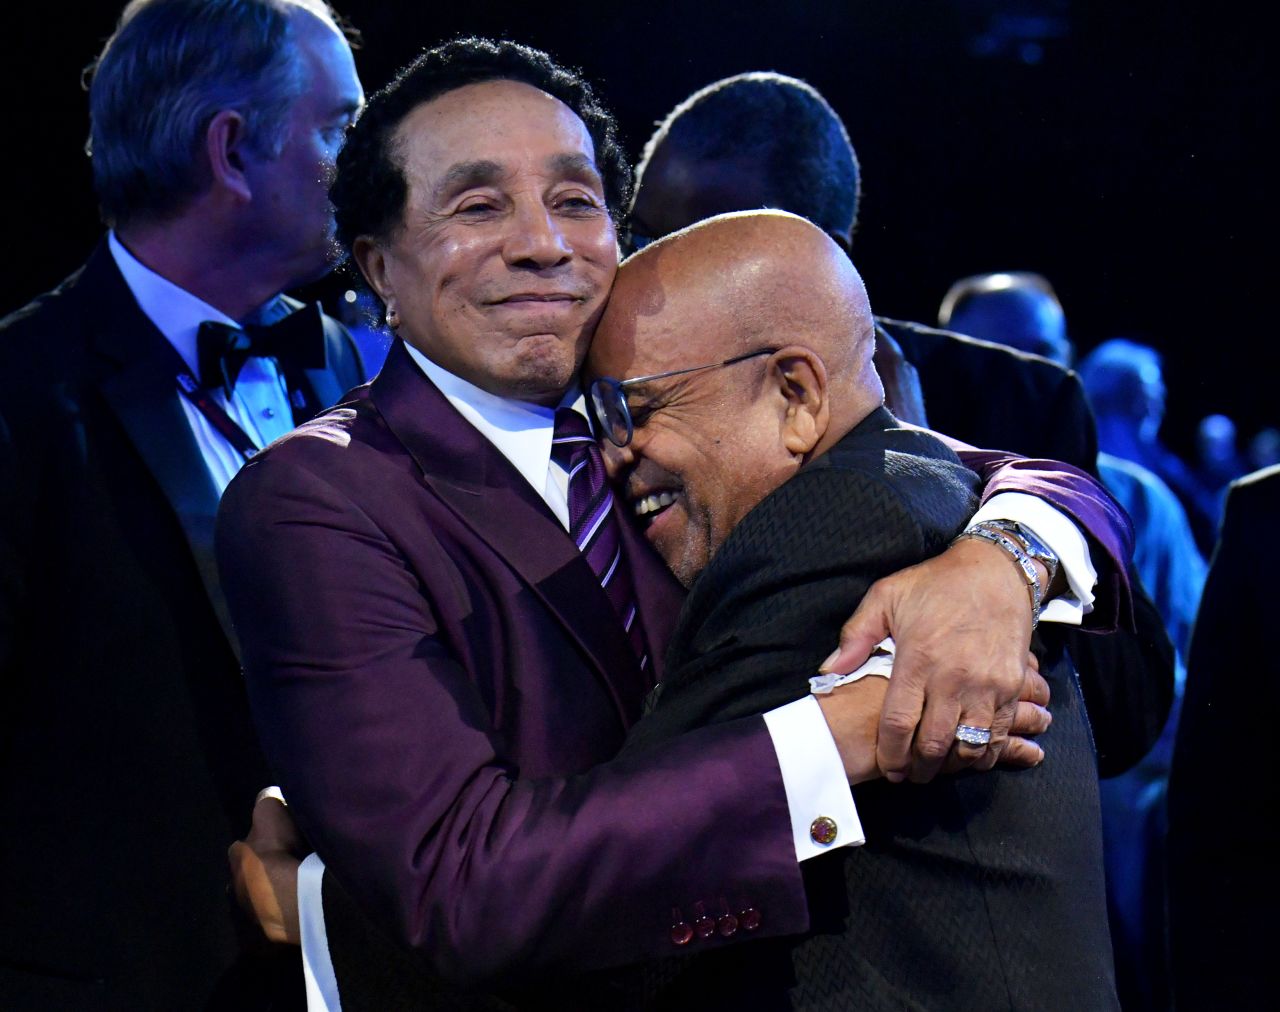 Musical legends Smokey Robinson, left, and Berry Gordy embrace each other as they are recognized as MusiCares' Persons of the Year on Friday, February 3. MusiCares is the philanthropic arm of the National Academy of Recording Arts and Sciences.